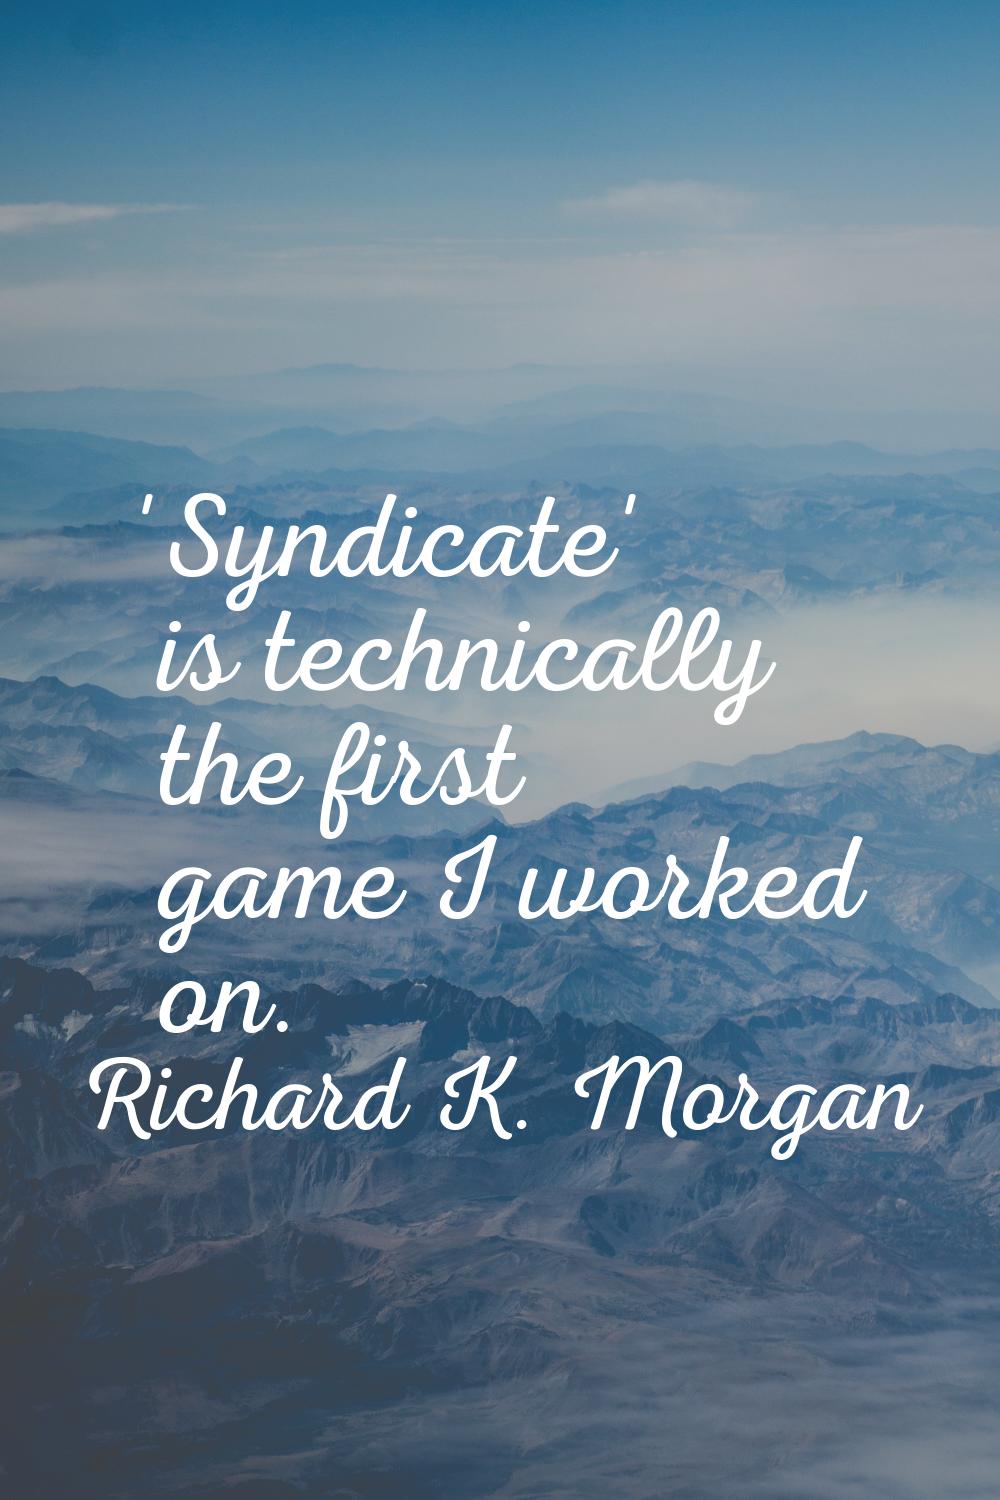 'Syndicate' is technically the first game I worked on.